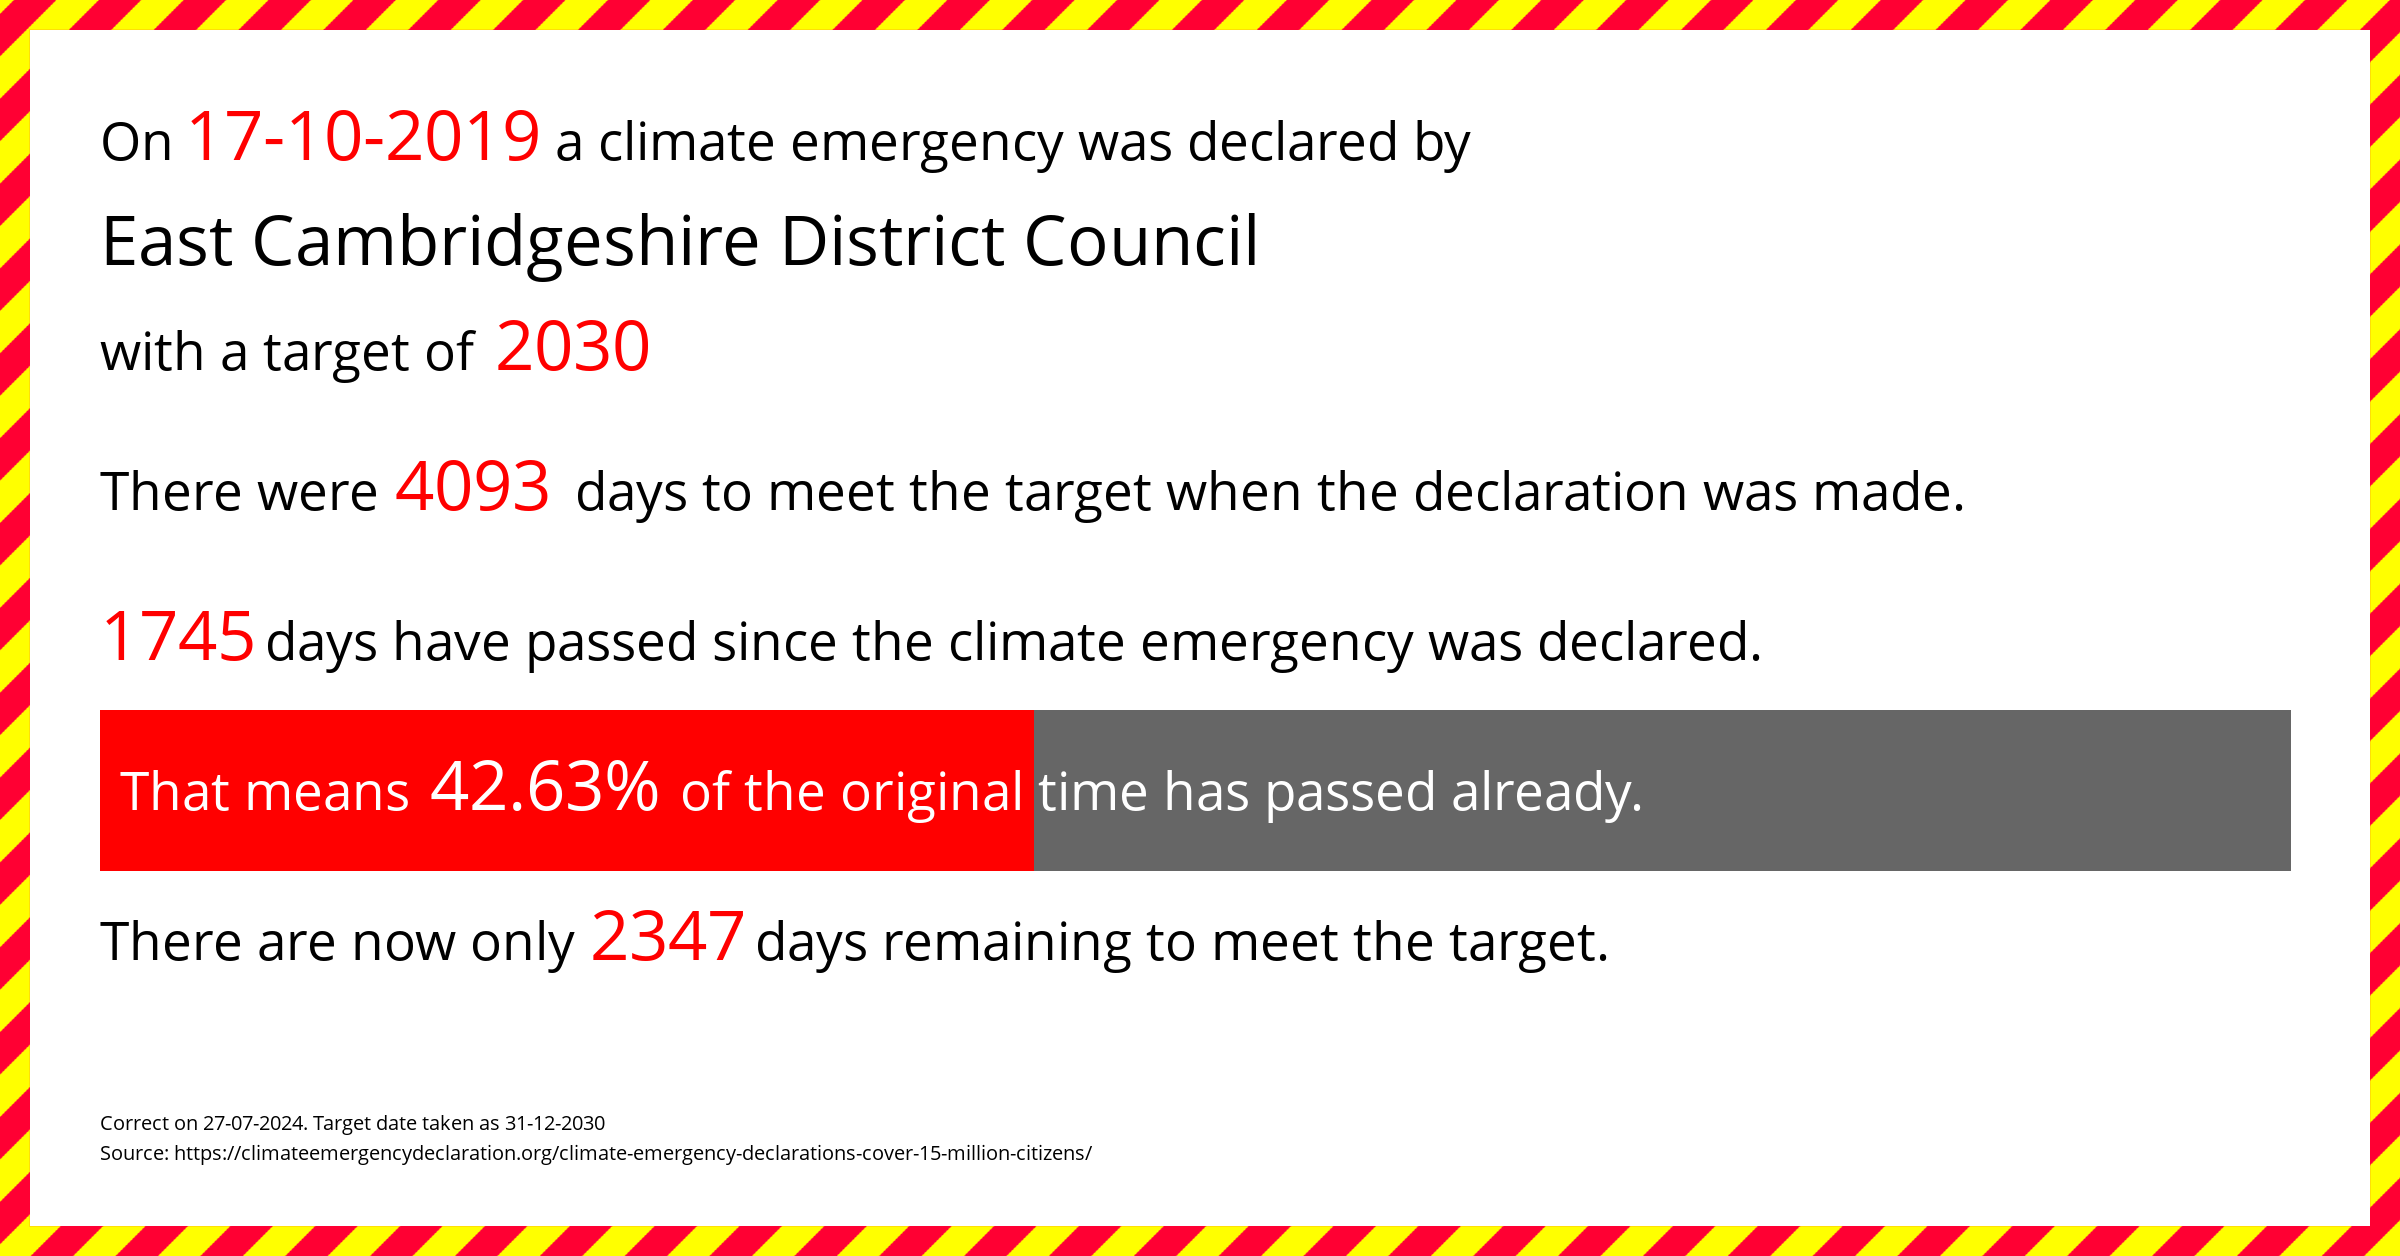 East Cambridgeshire District Council declared a Climate emergency on Thursday 17th October 2019, with a target of 2030.